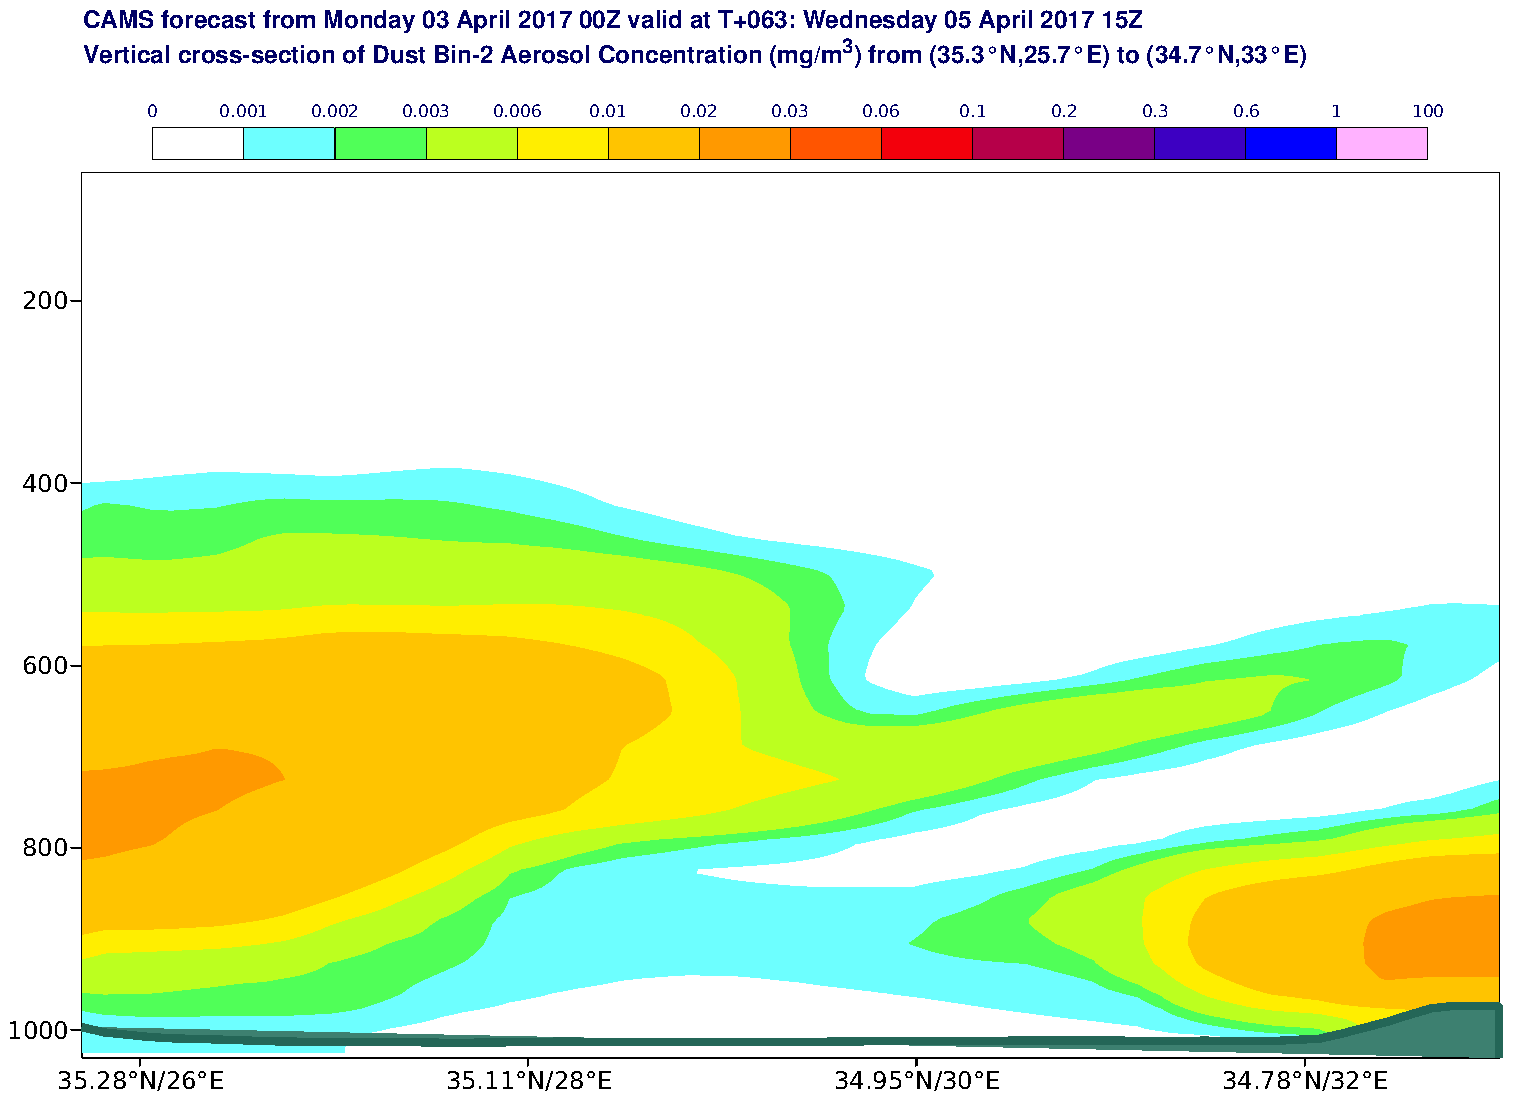 Vertical cross-section of Dust Bin-2 Aerosol Concentration (mg/m3) valid at T63 - 2017-04-05 15:00